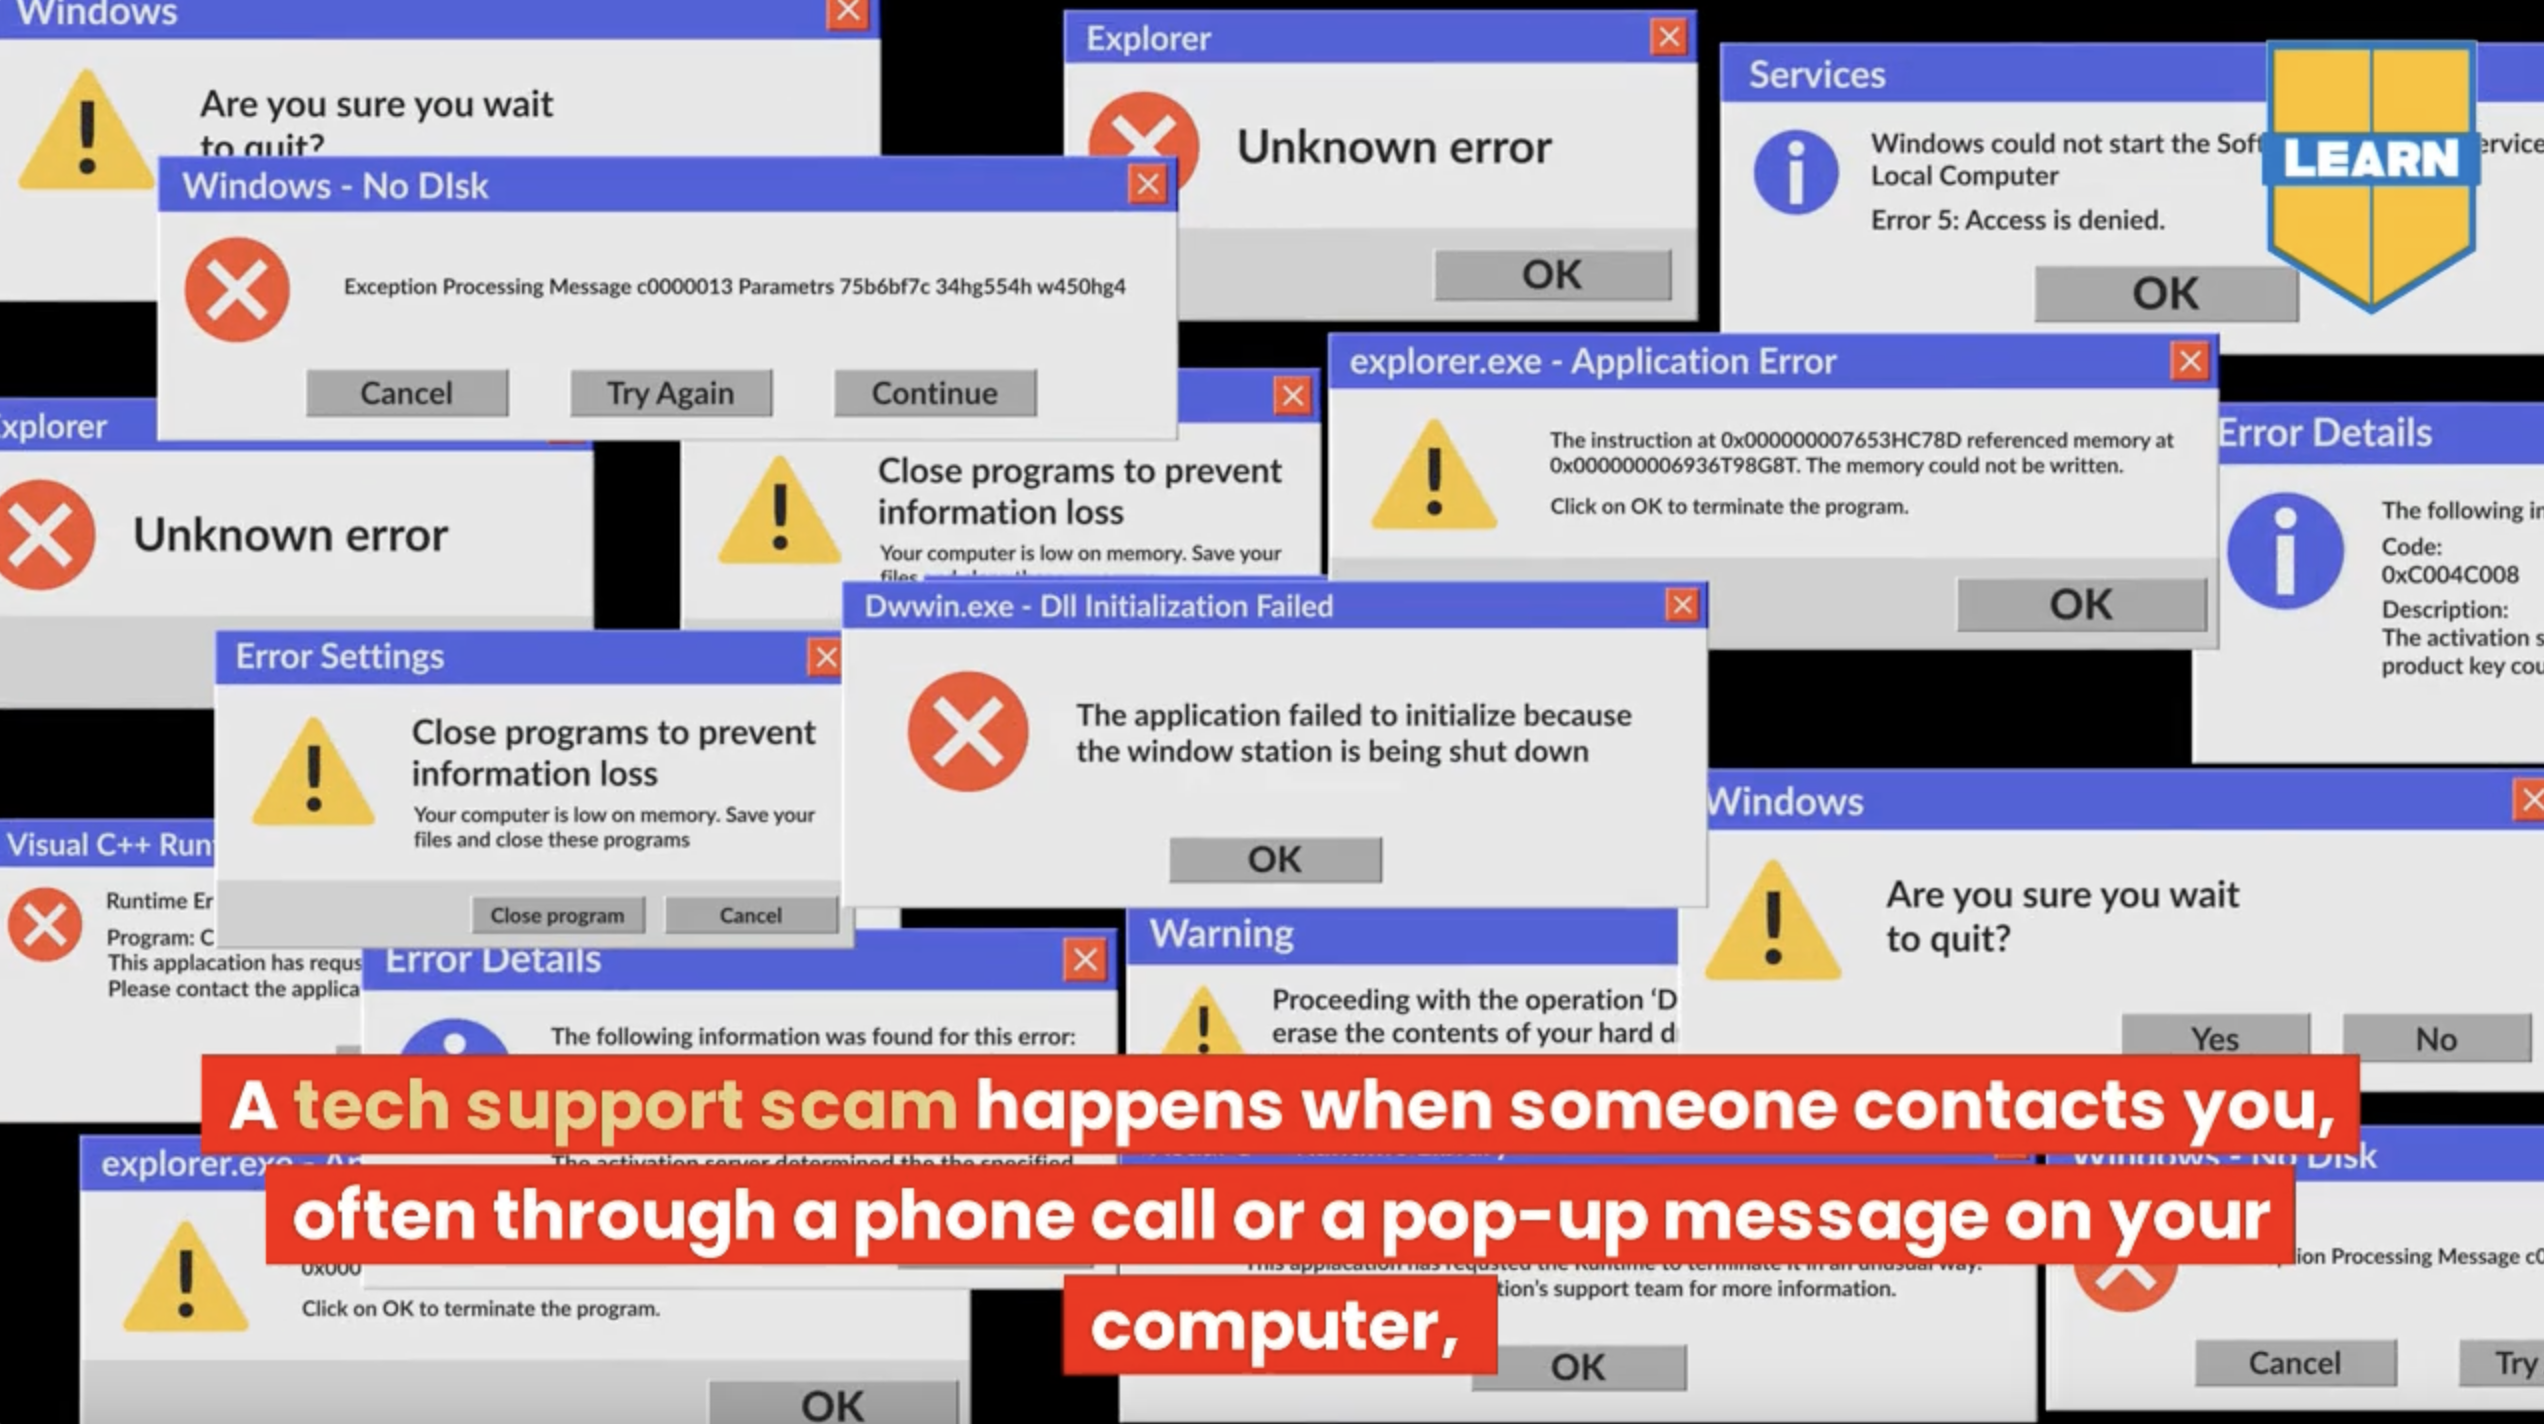 What are Tech Support Scams?